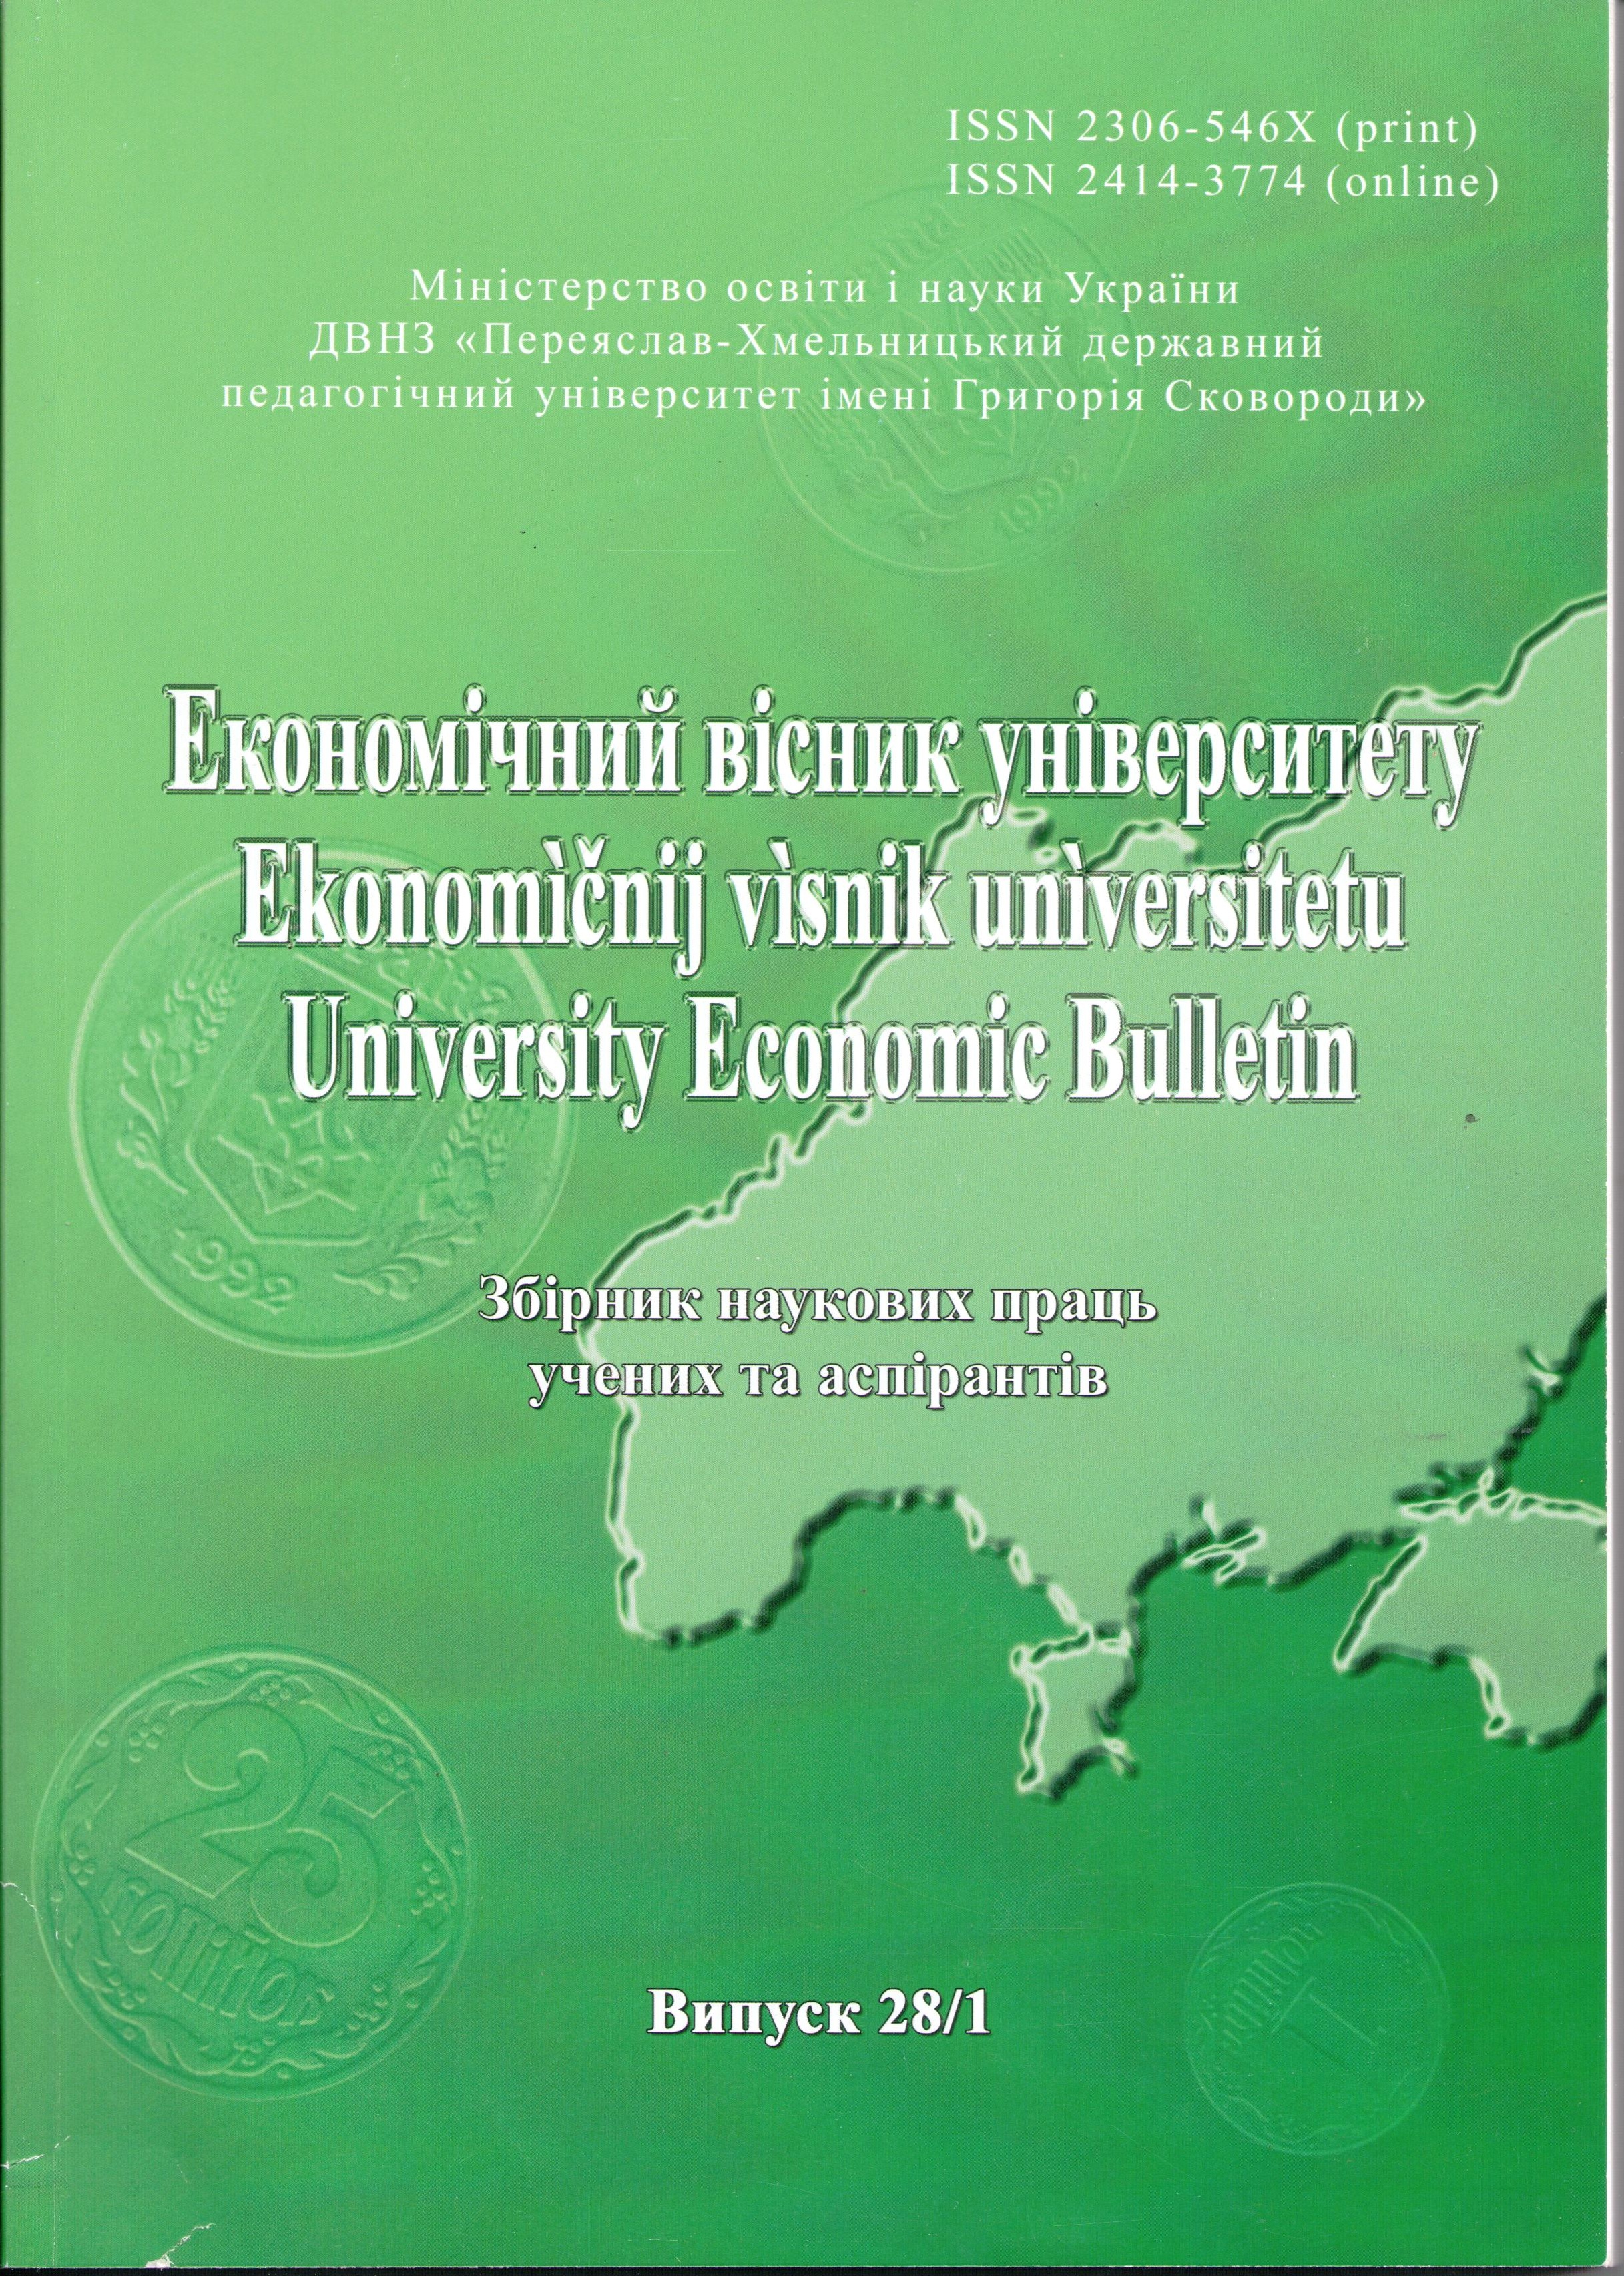 History of formation of economic vocabulary denoting actions and processes Cover Image